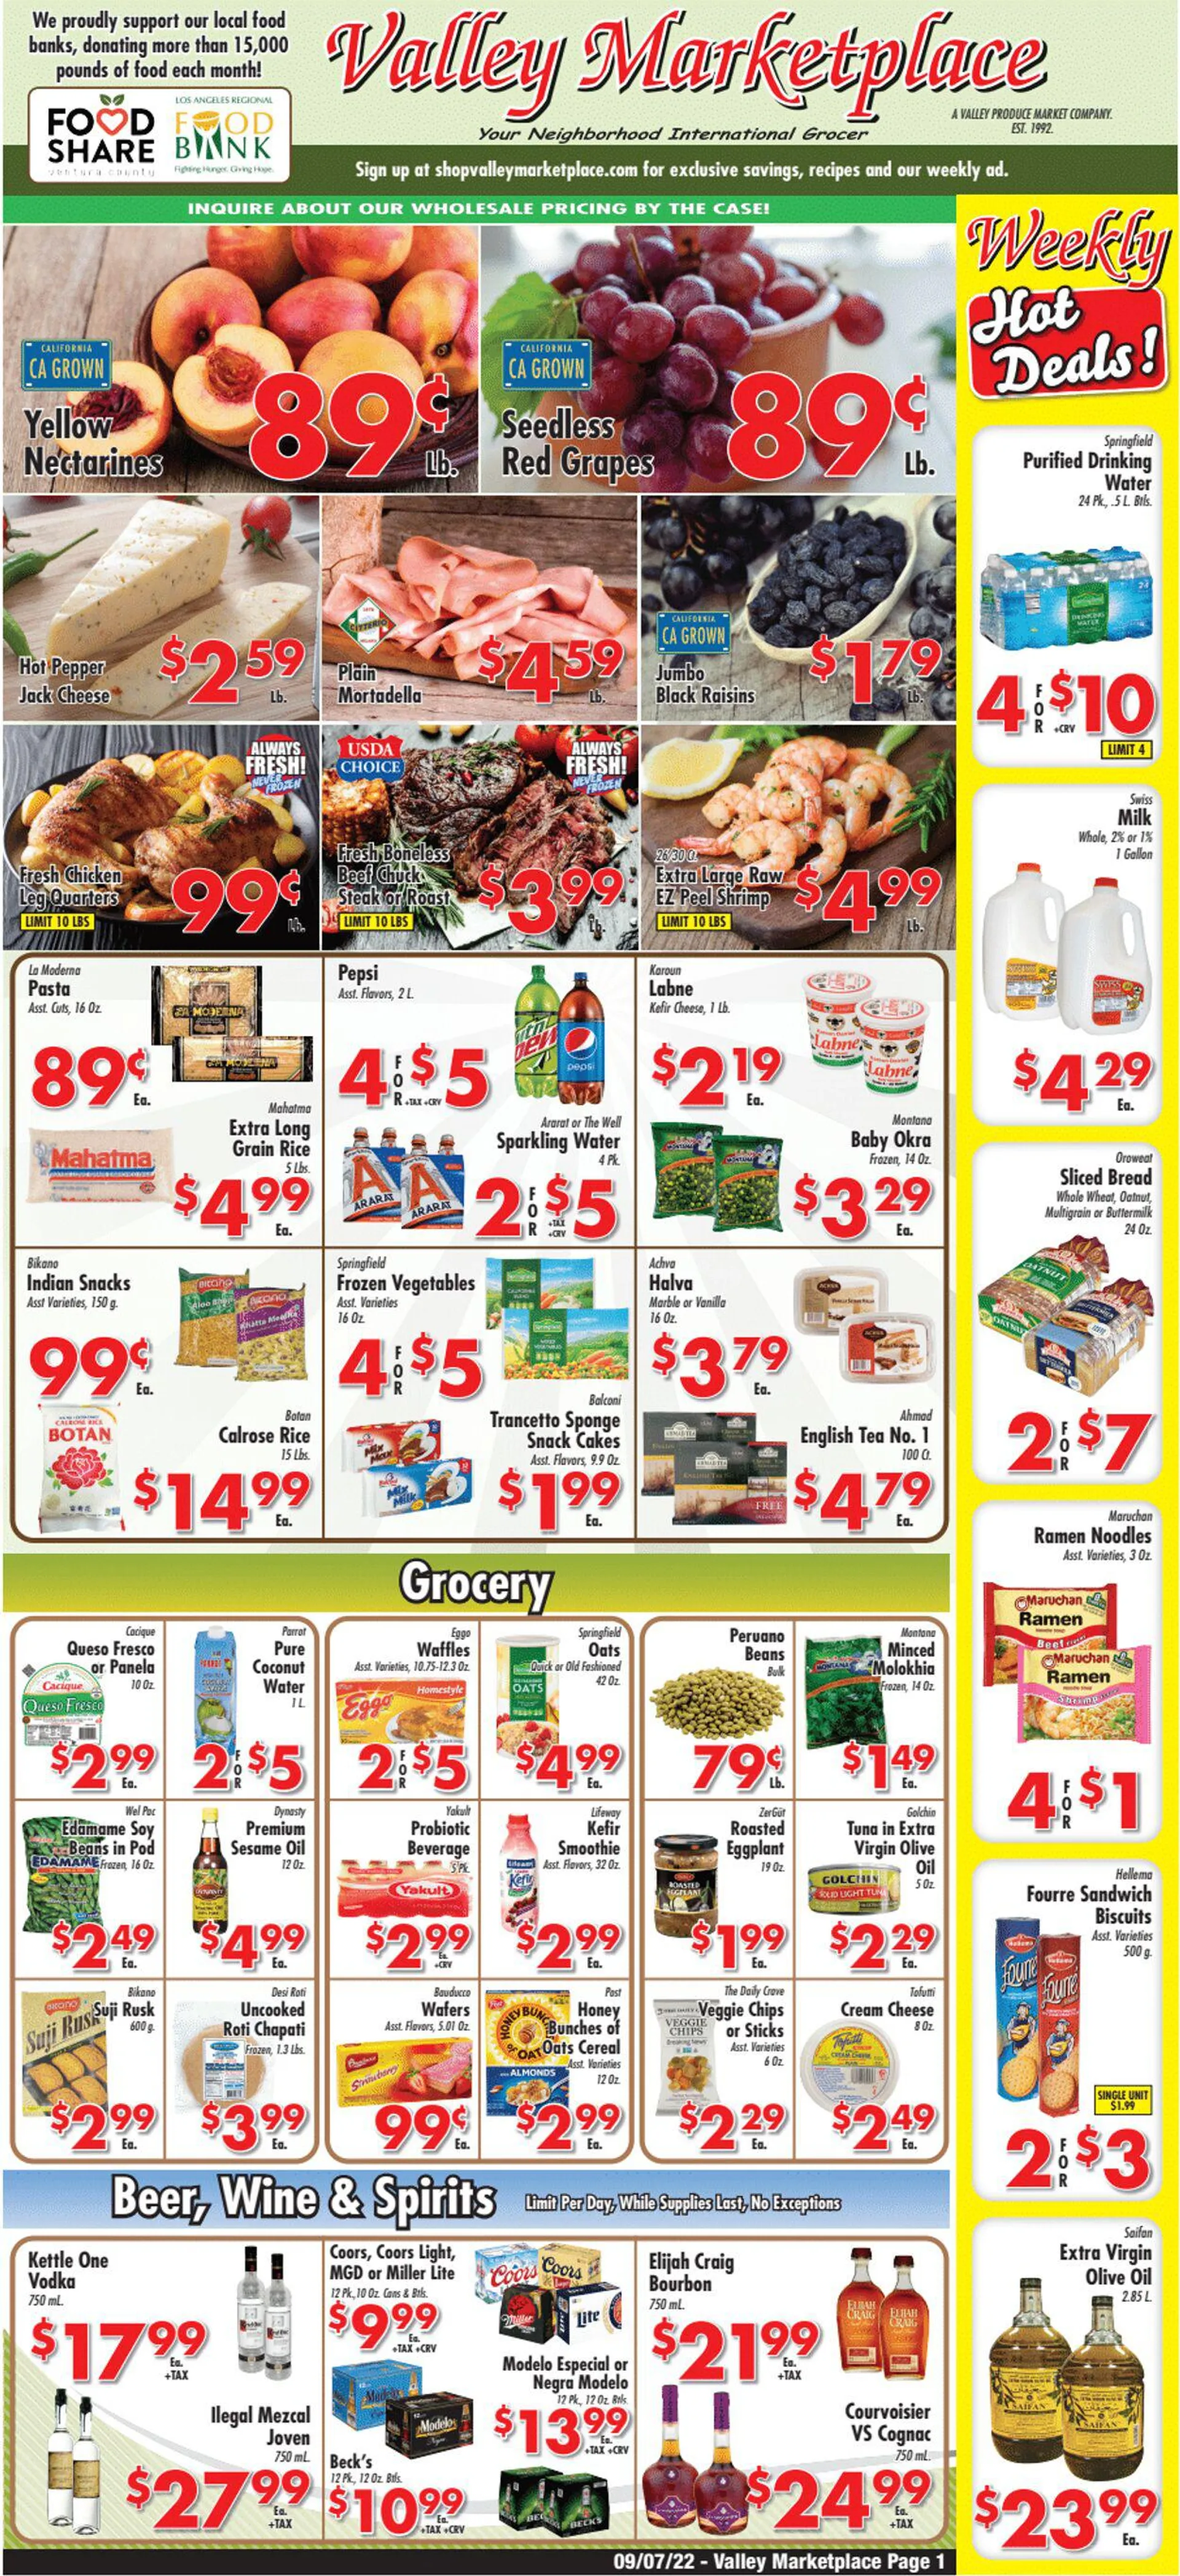 Valley Marketplace Current weekly ad - 1